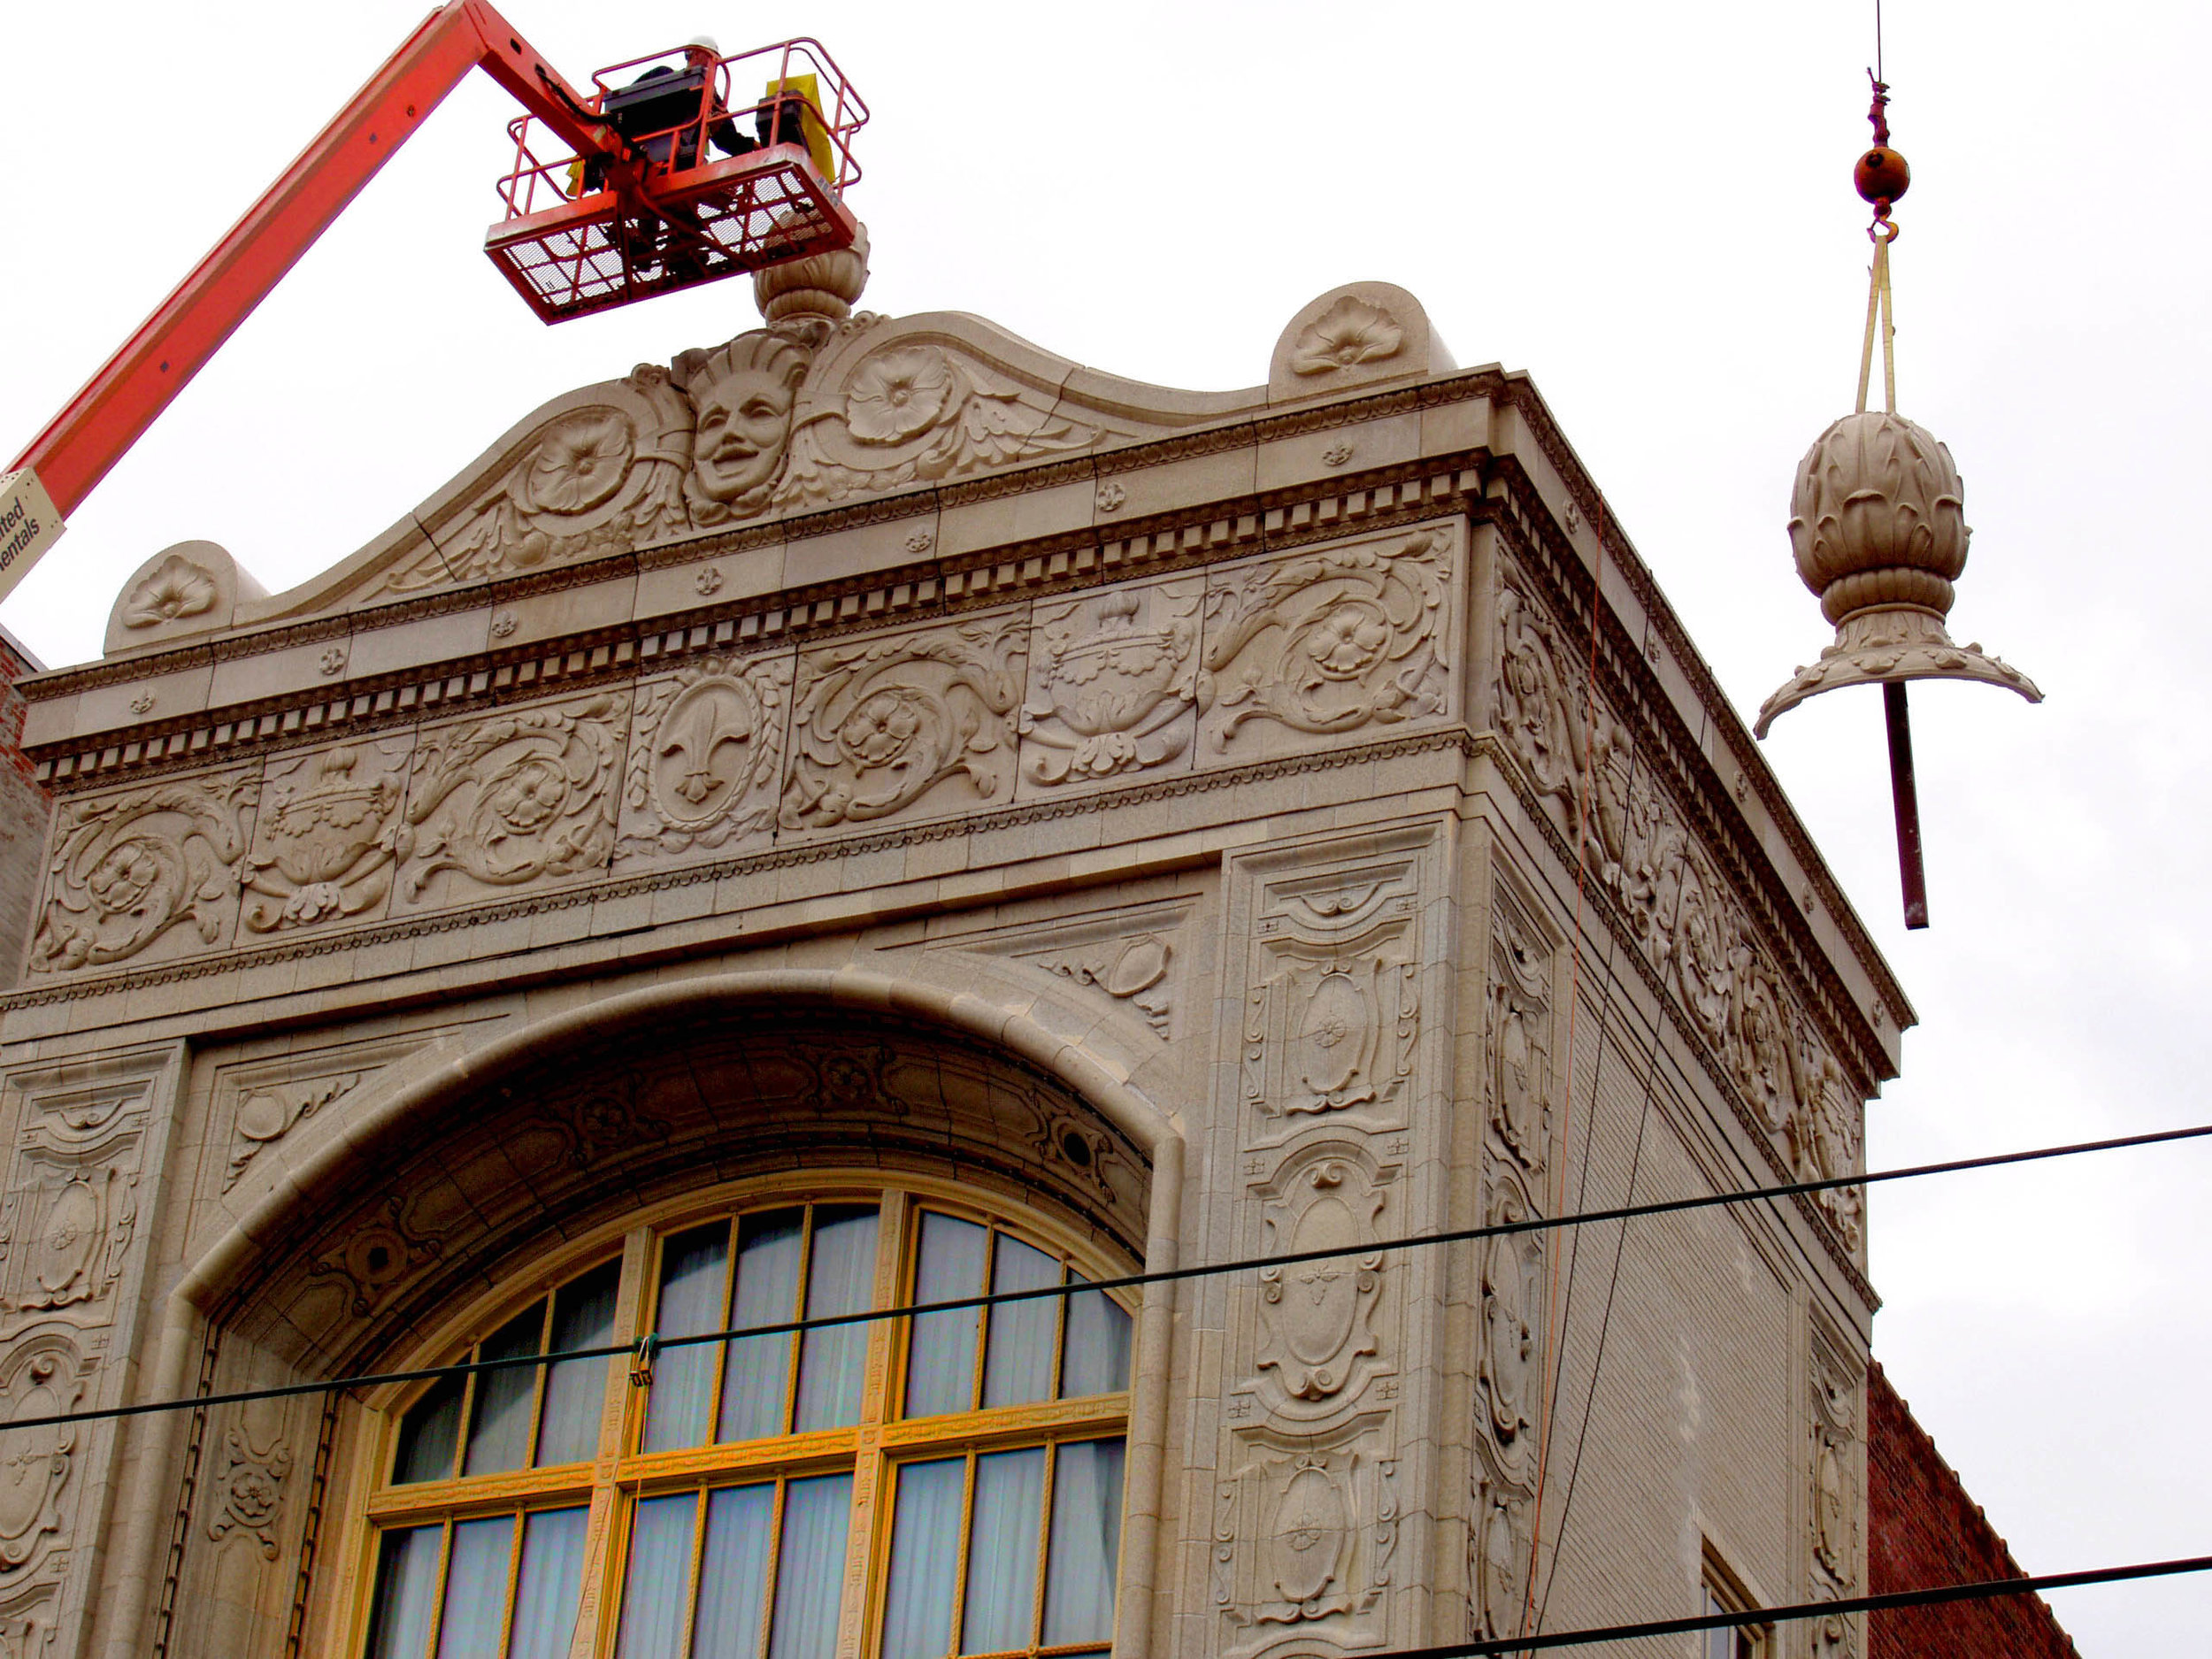  A man on a construction lift hovers over the sculptural roof elements of Sheas theatre in Buffalo New york. 